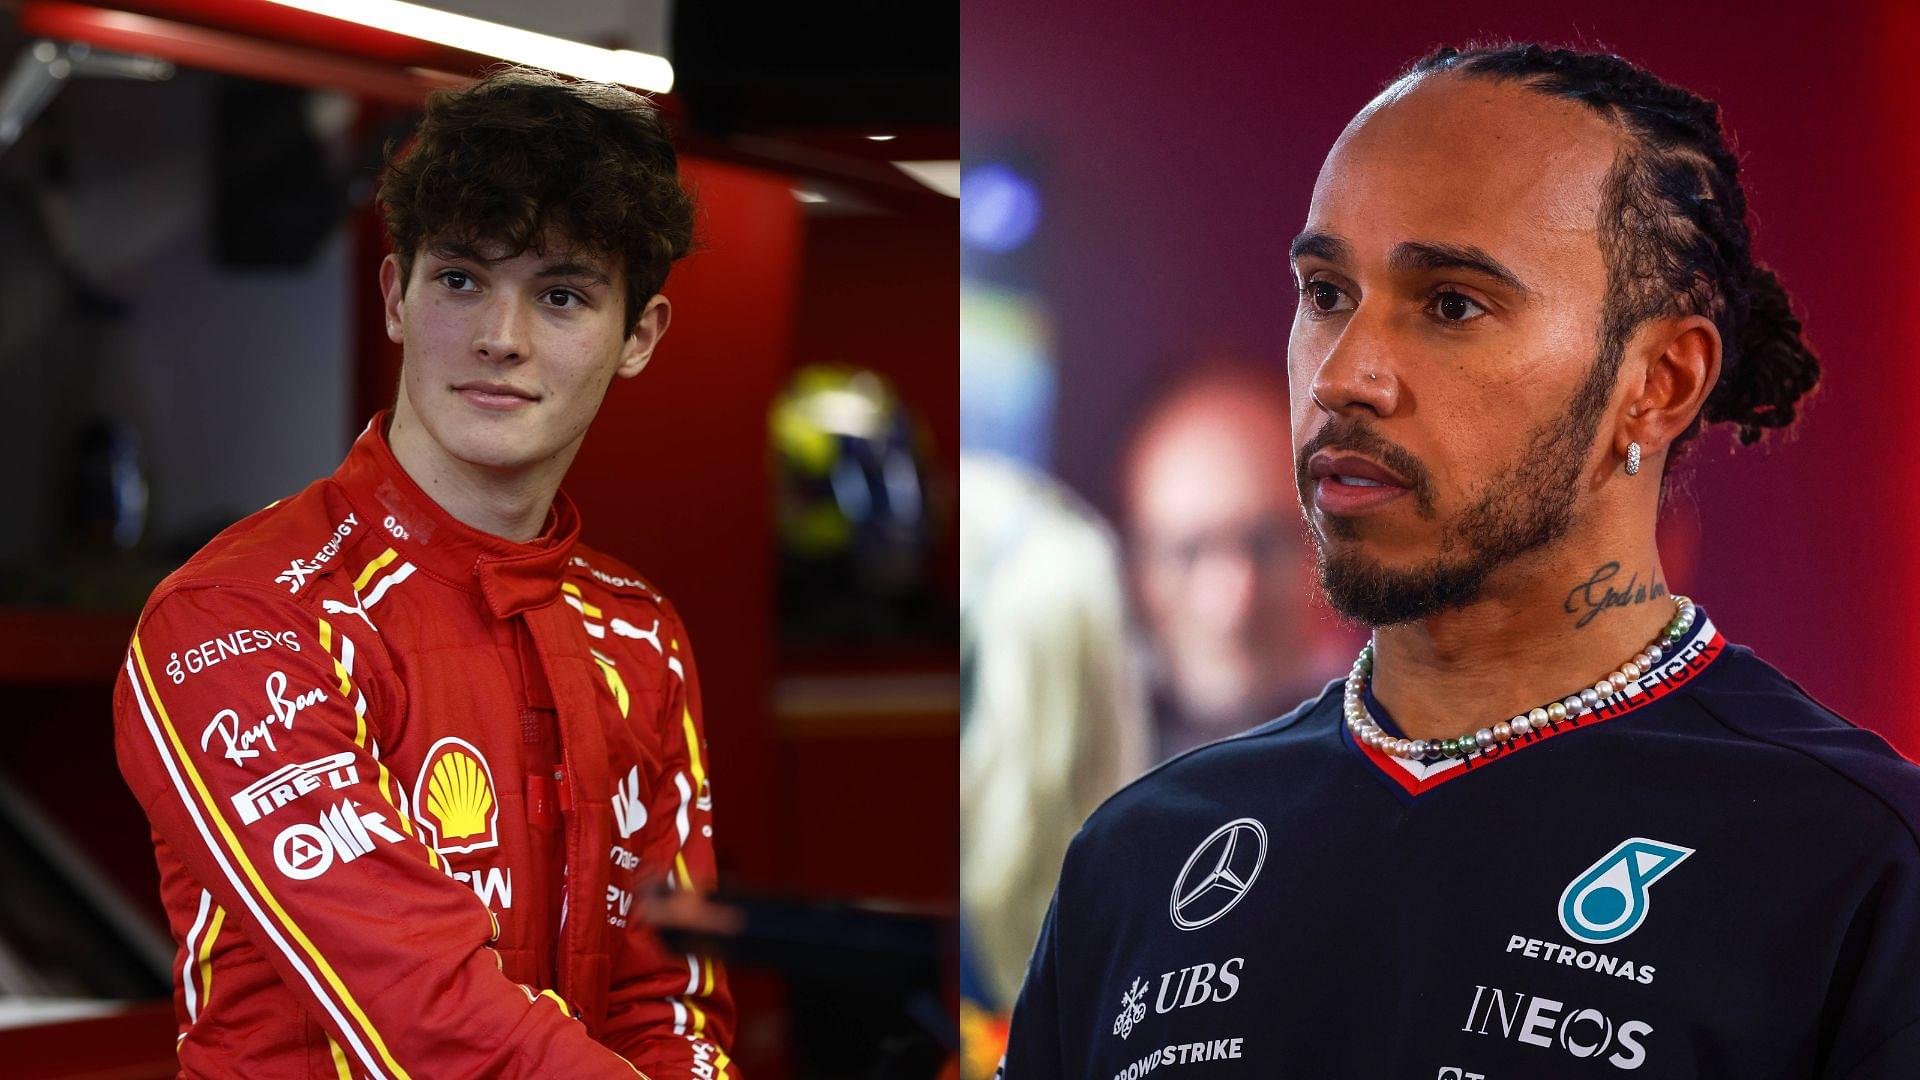 Lewis Hamilton Admits Oliver Bearman Did Something He Could Never Do- "Nowhere Near Ready"